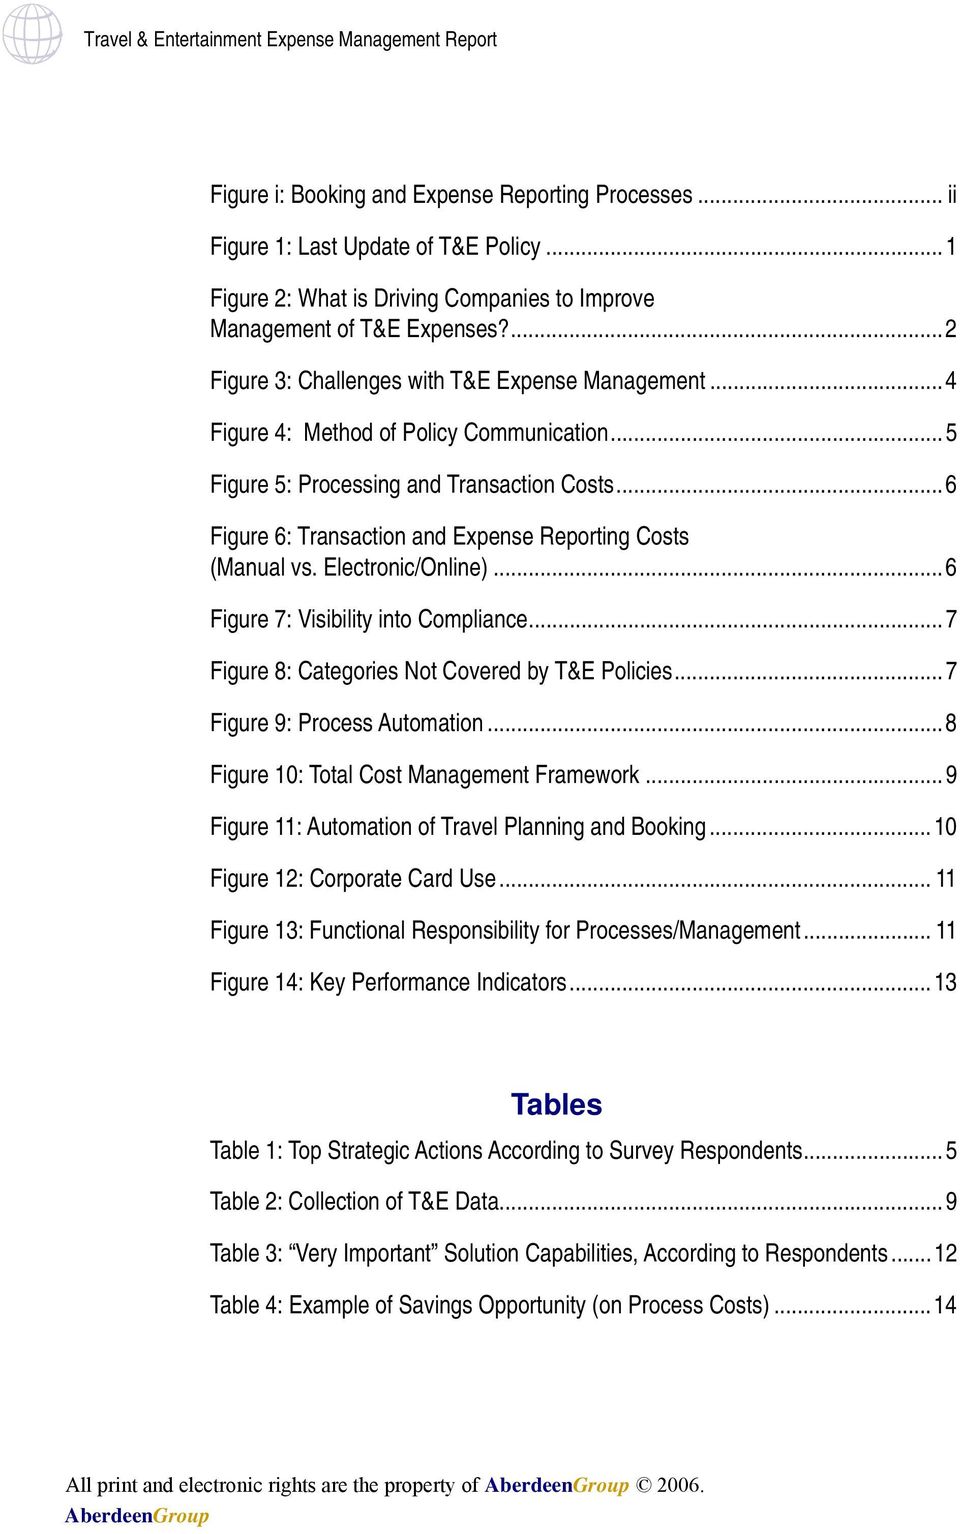 ..6 Figure 6: Transaction and Expense Reporting Costs (Manual vs. Electronic/Online)...6 Figure 7: Visibility into Compliance...7 Figure 8: Categories Not Covered by T&E Policies.